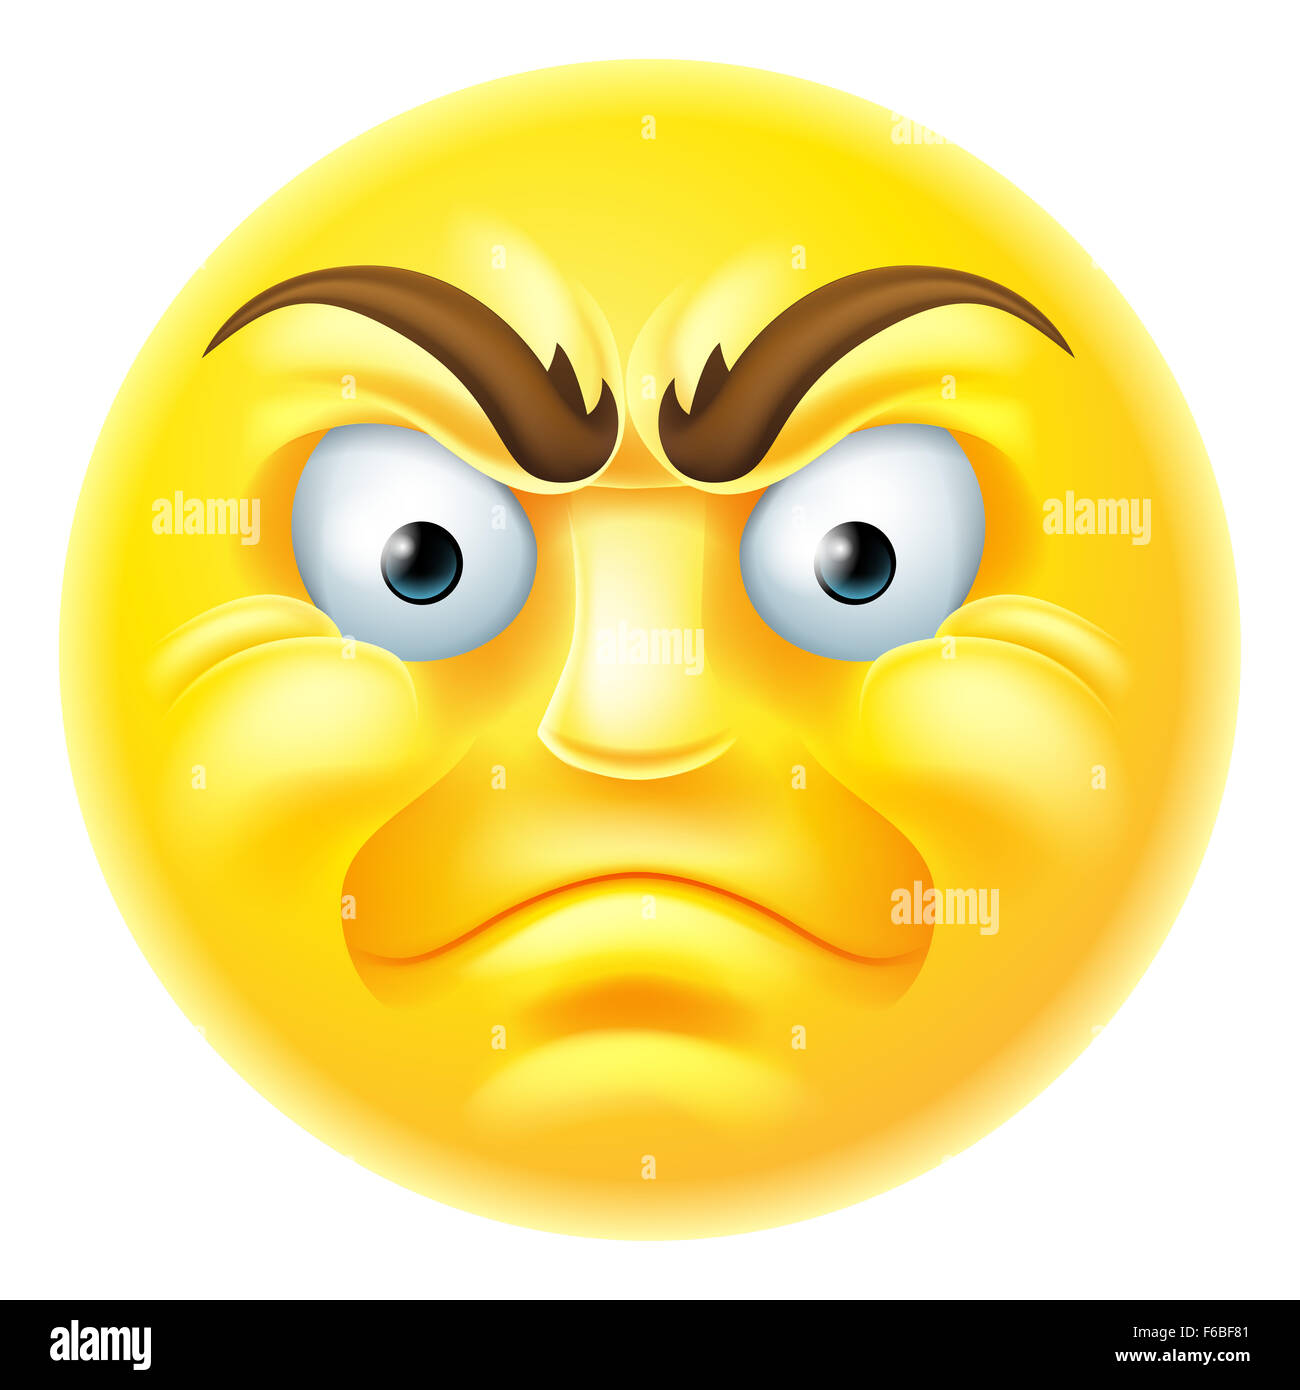 A cartoon emoji emoticon icon looking very angry or furious Stock Photo